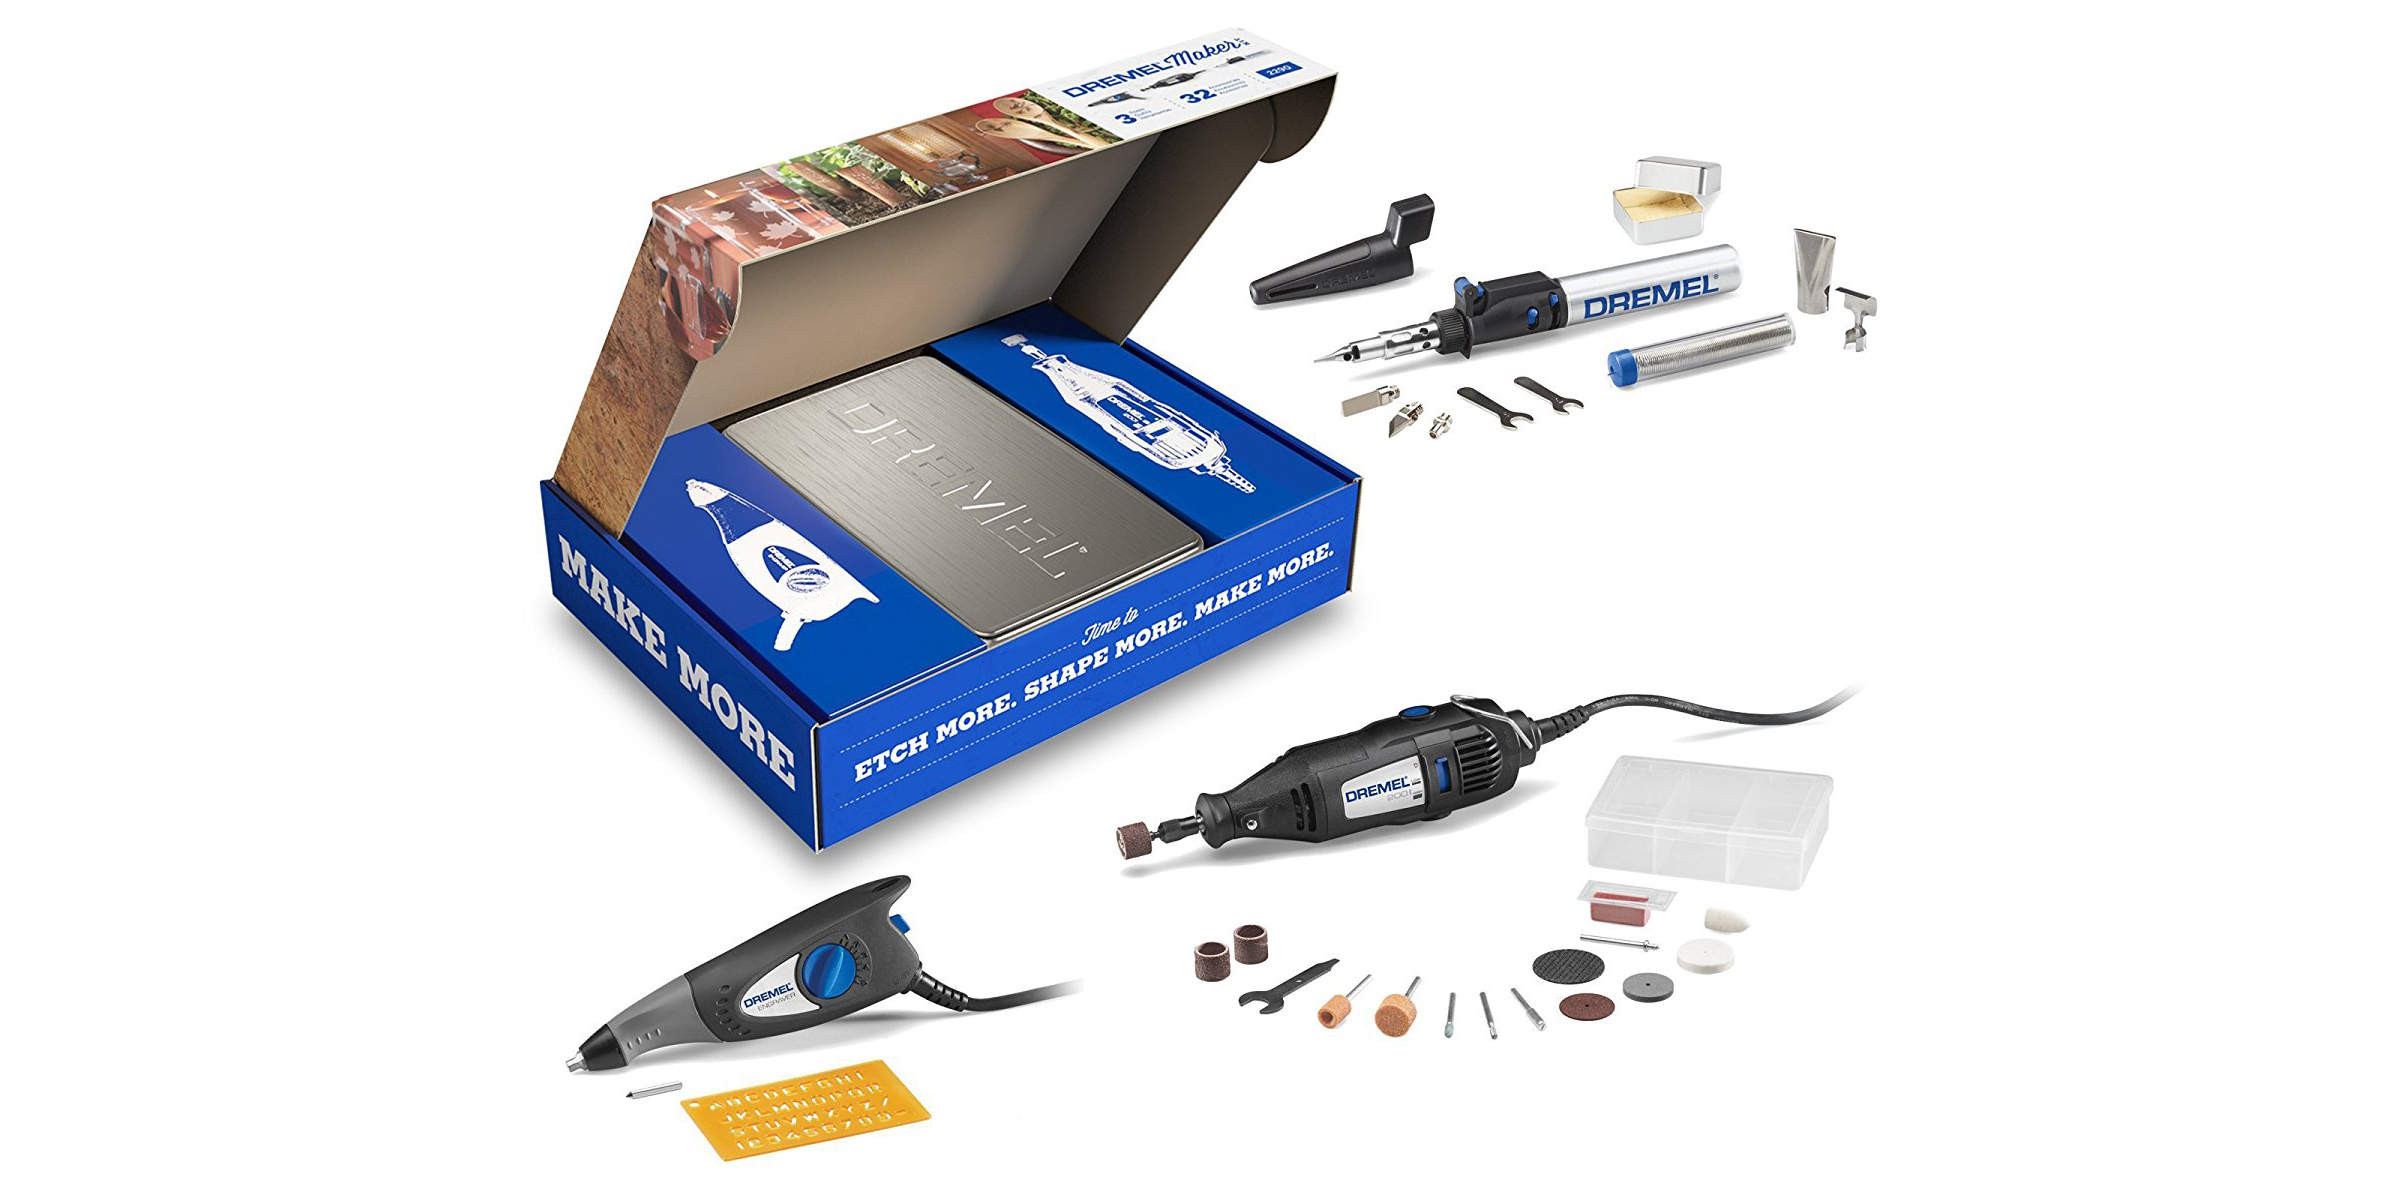 Dremel 200-Series Two-Speed Rotary Tool Kit with Engraver Bundle